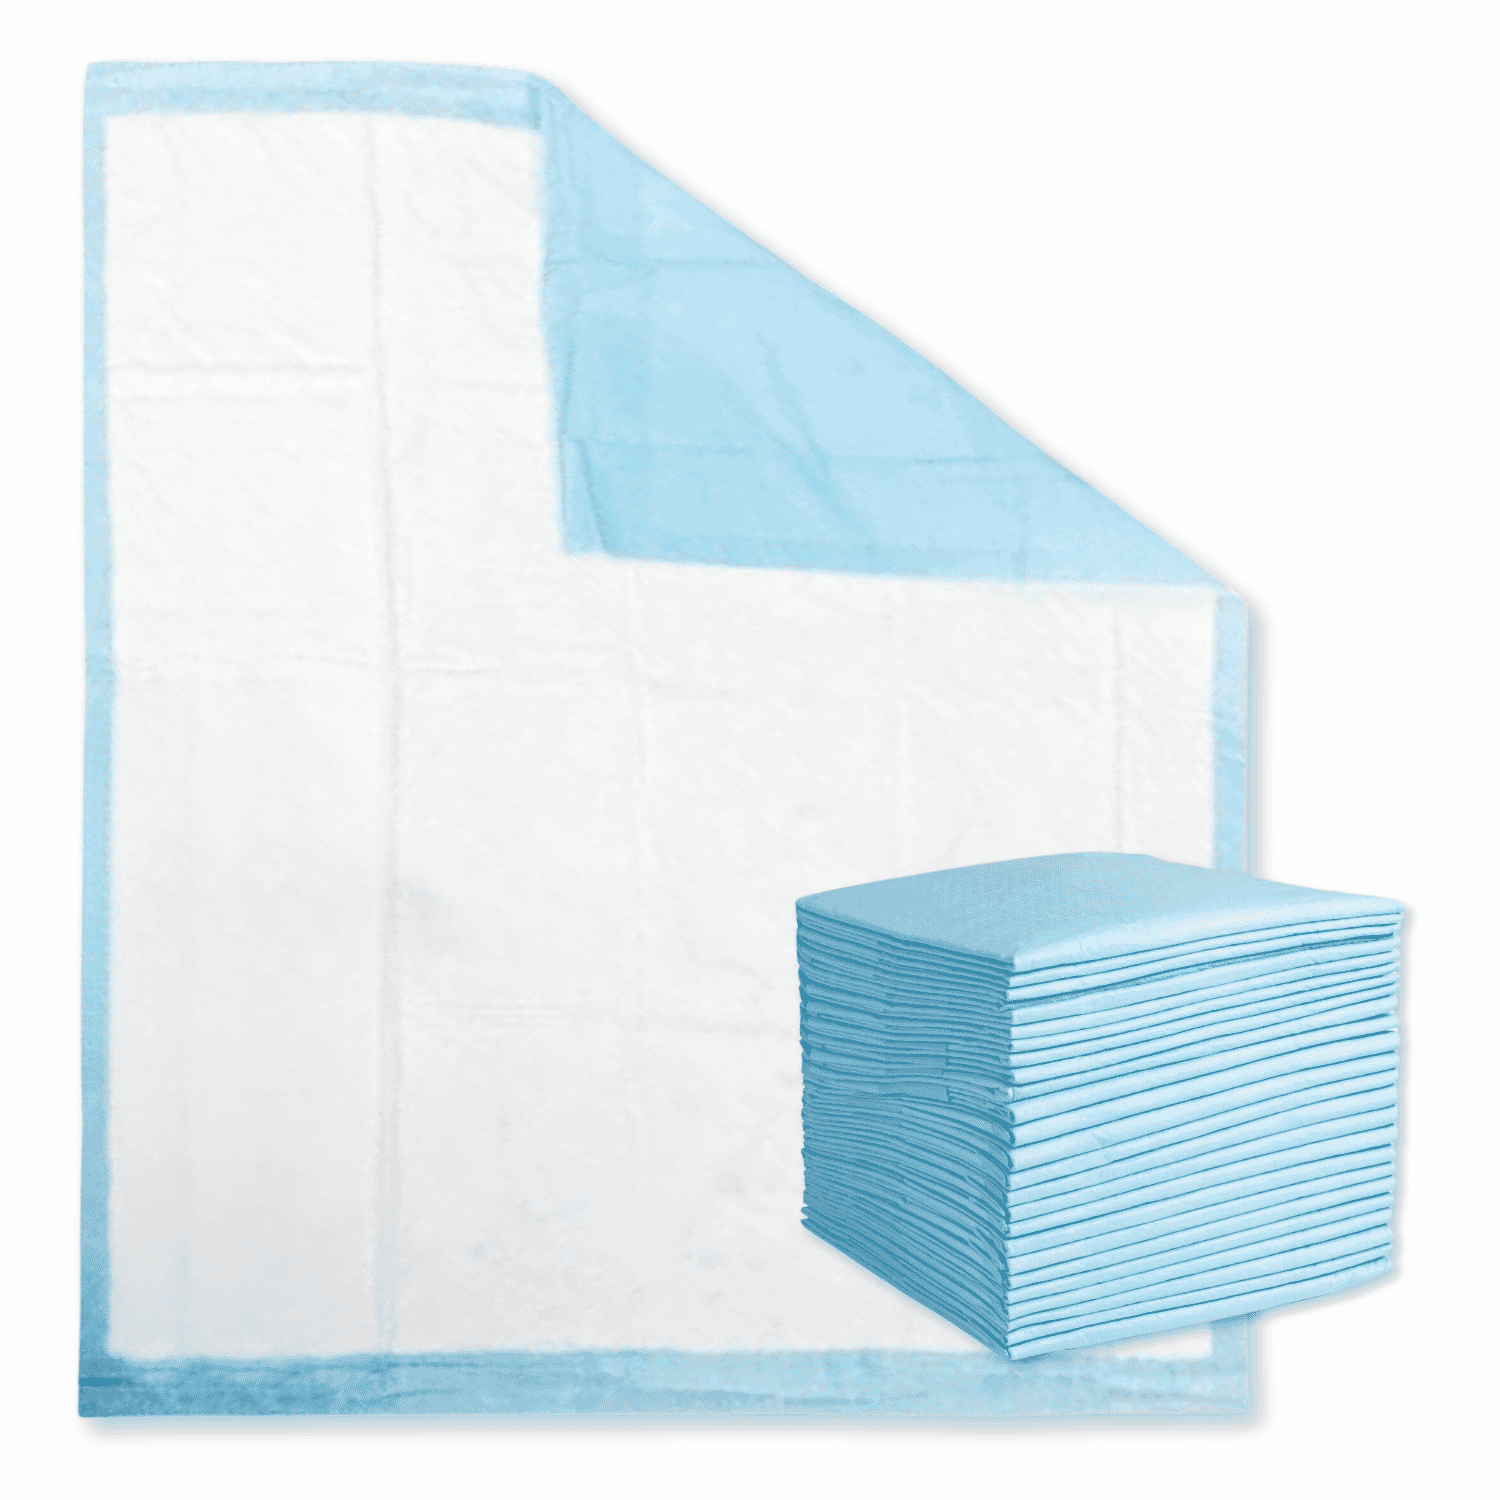 View Disposable Incontinence Bed Pads Disposable Bed Pads Medium 60 x 60cm Pack of 35 absorbency 950ml information